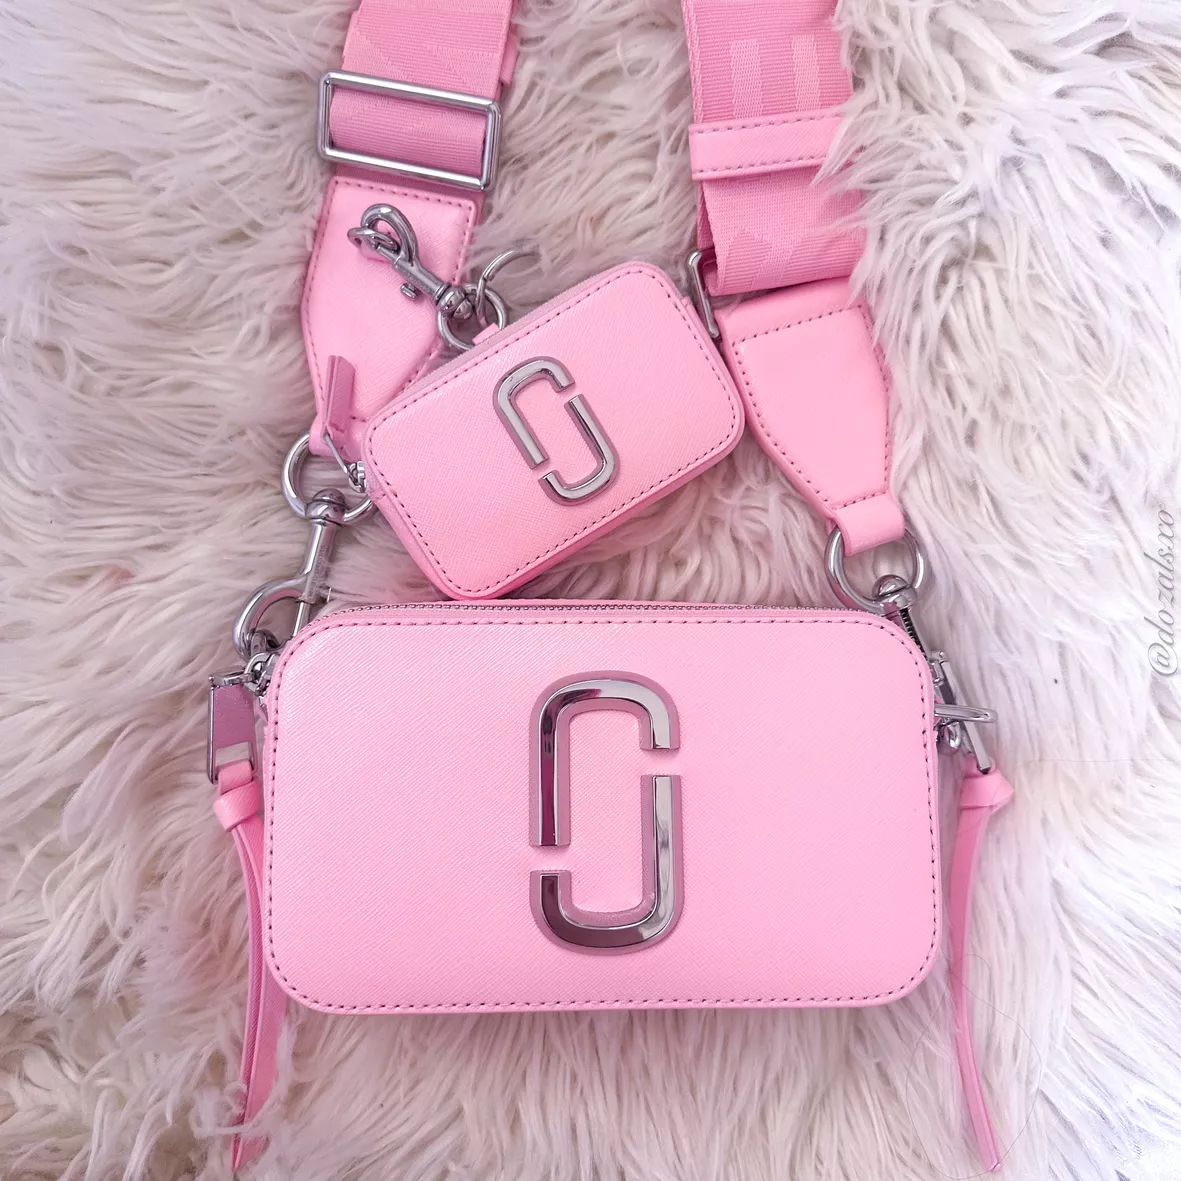 Style the new Marc Jacobs utility snapshot bag in Bubblegum pink